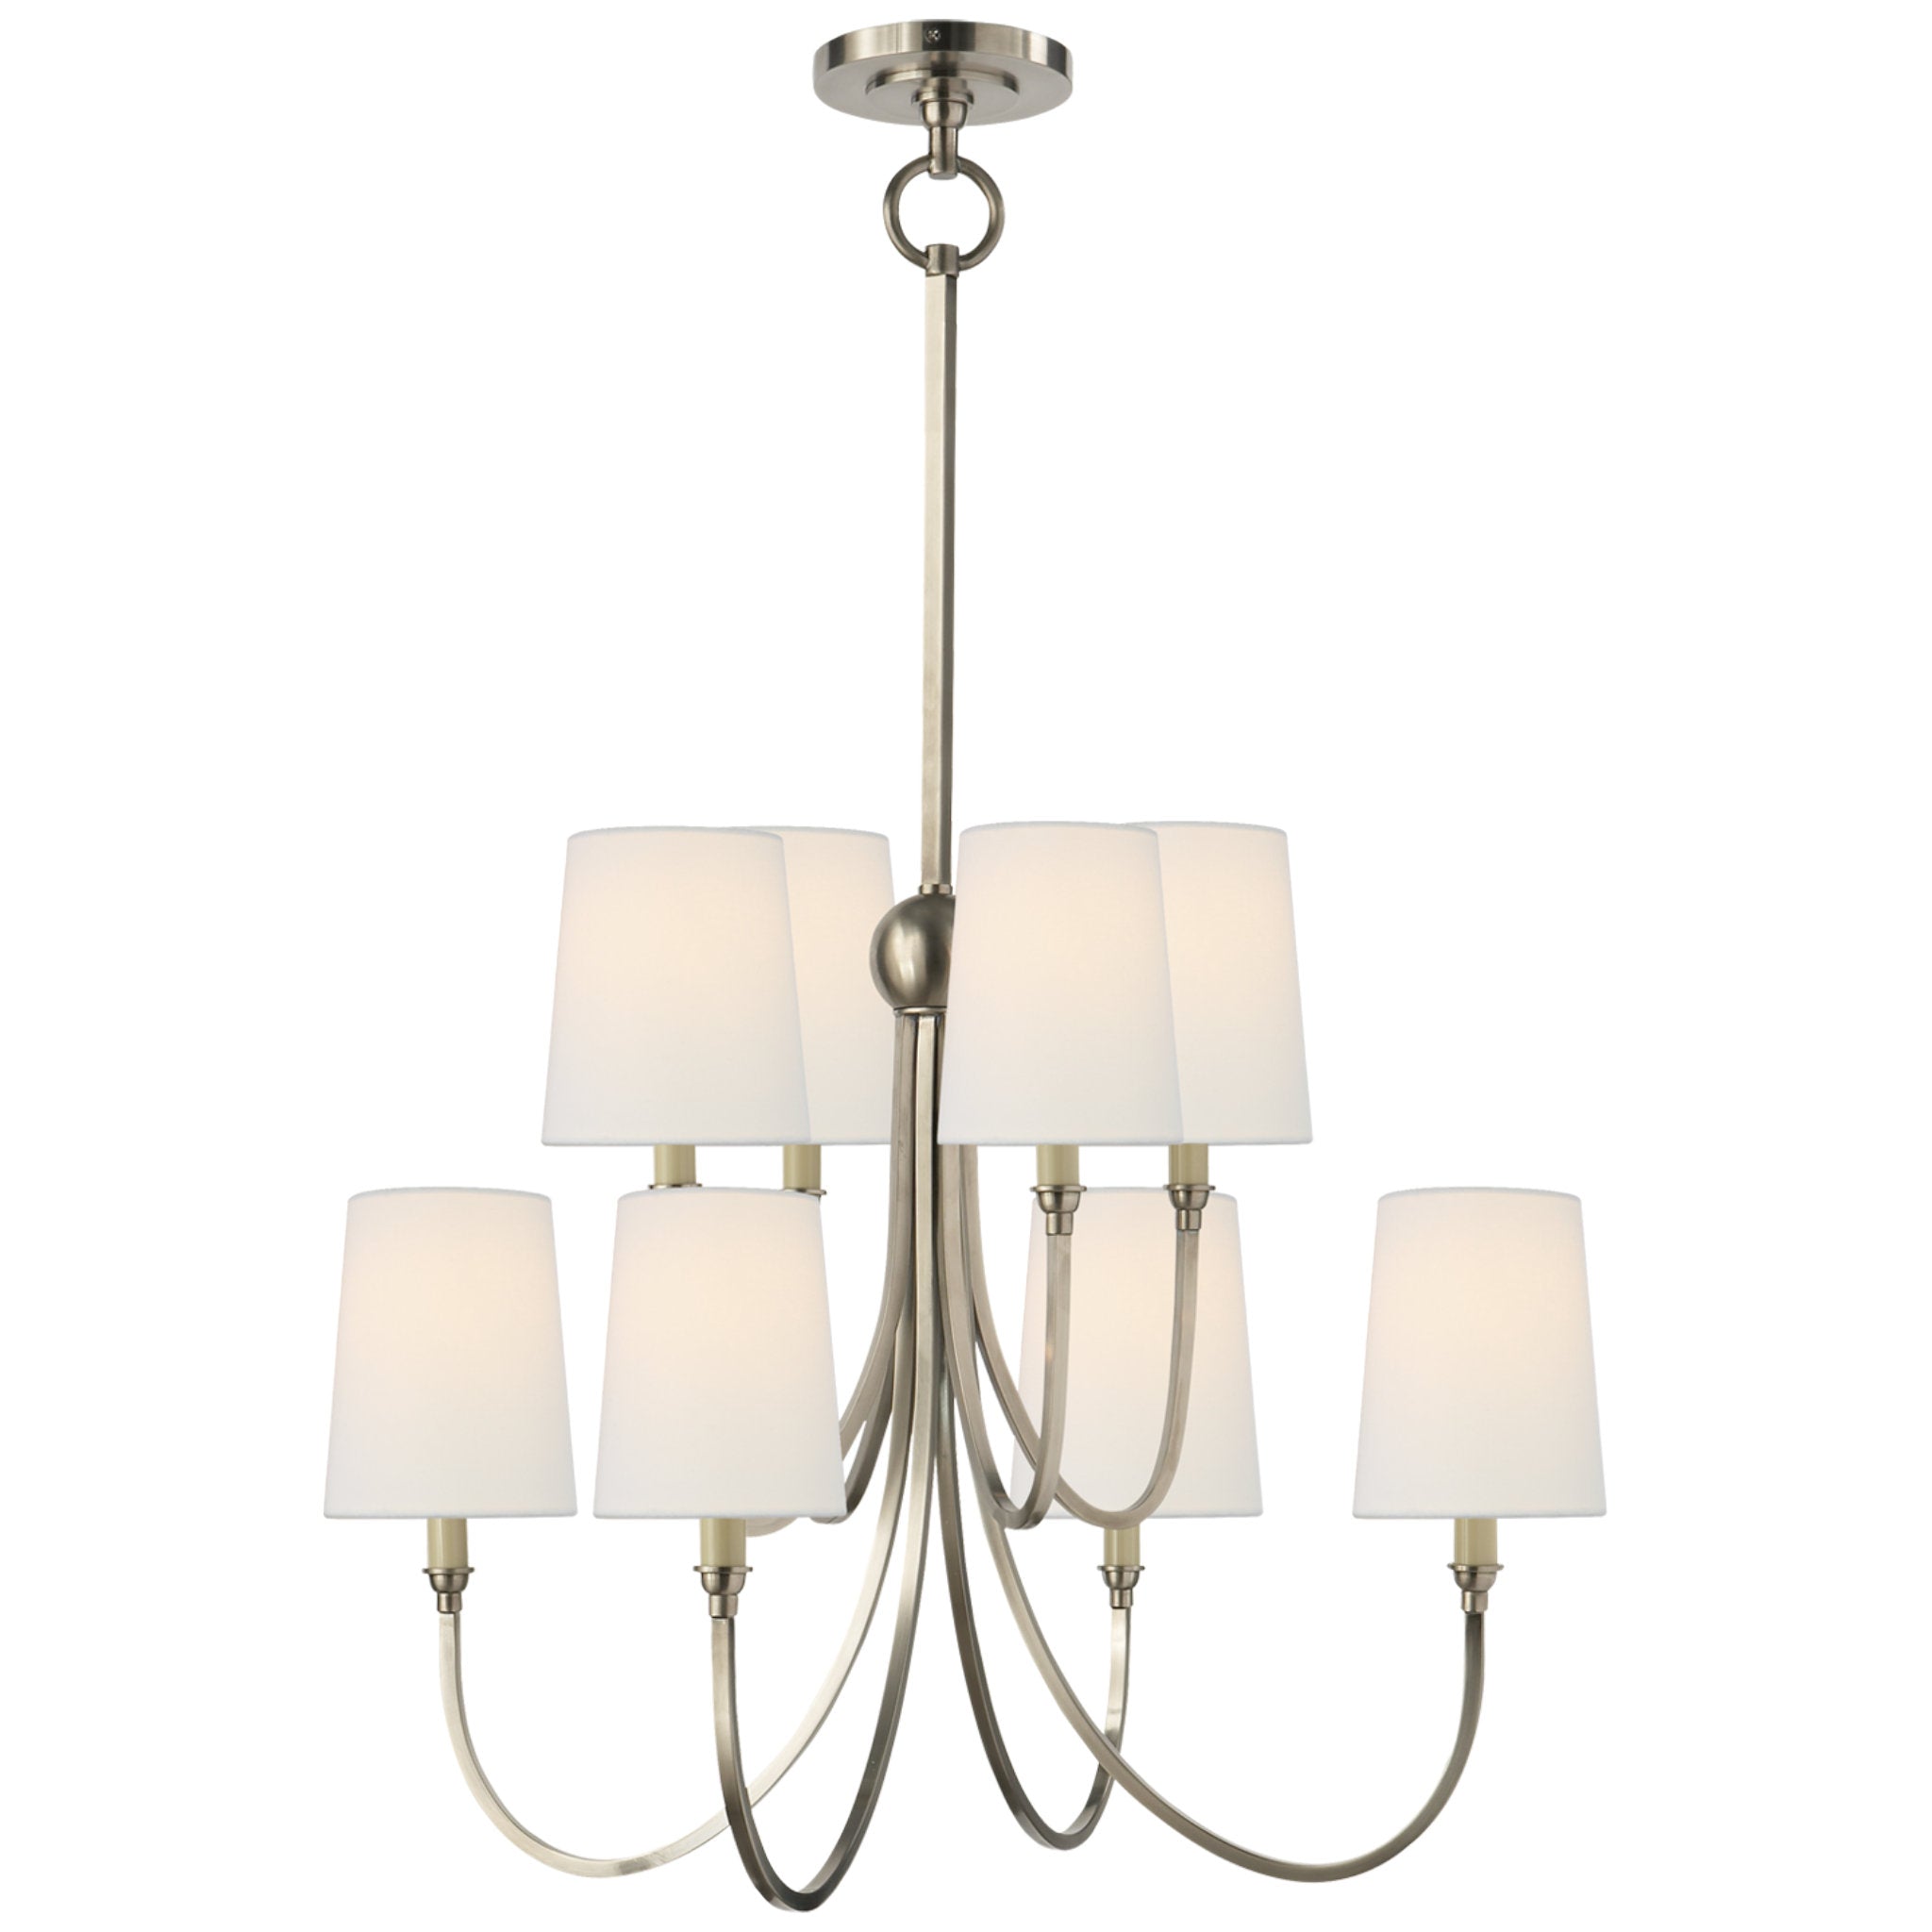 Thomas O'Brien Reed Large Chandelier in Antique Nickel with Linen Shades